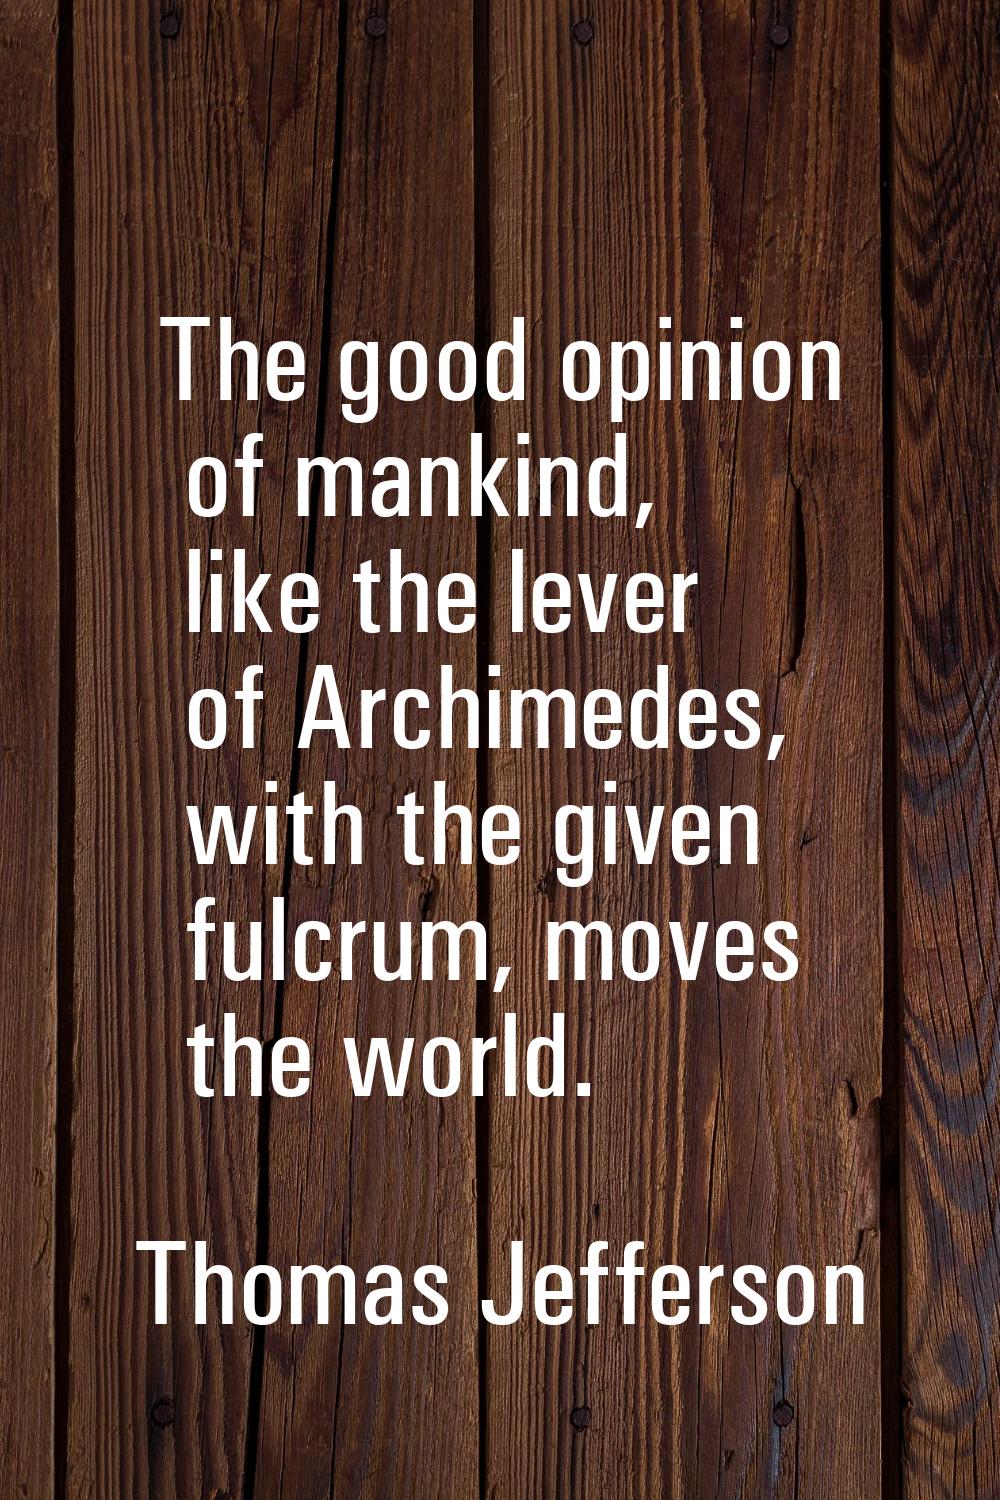 The good opinion of mankind, like the lever of Archimedes, with the given fulcrum, moves the world.